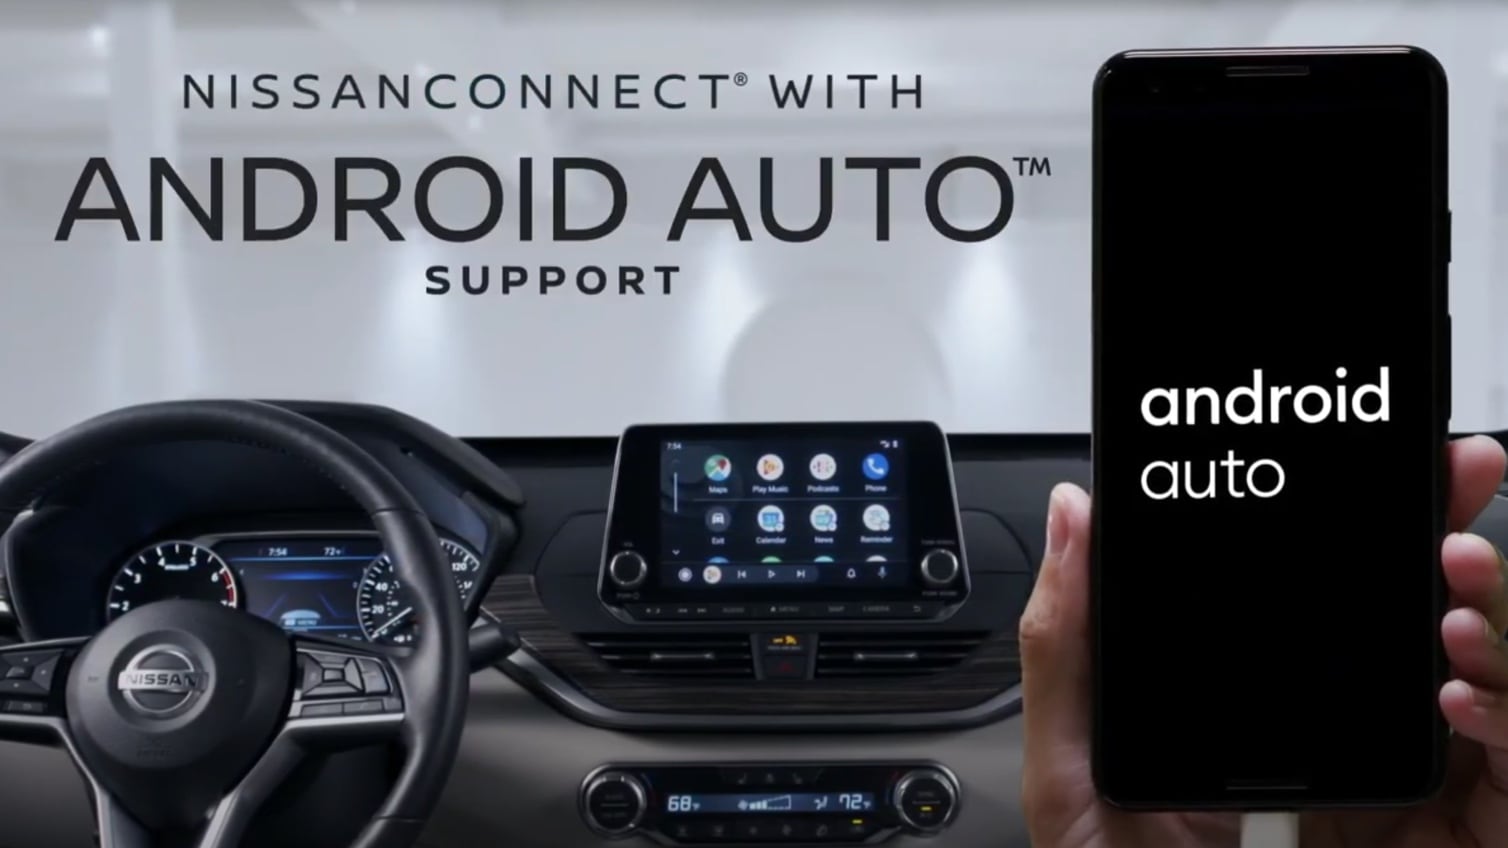 Nissan Android Auto